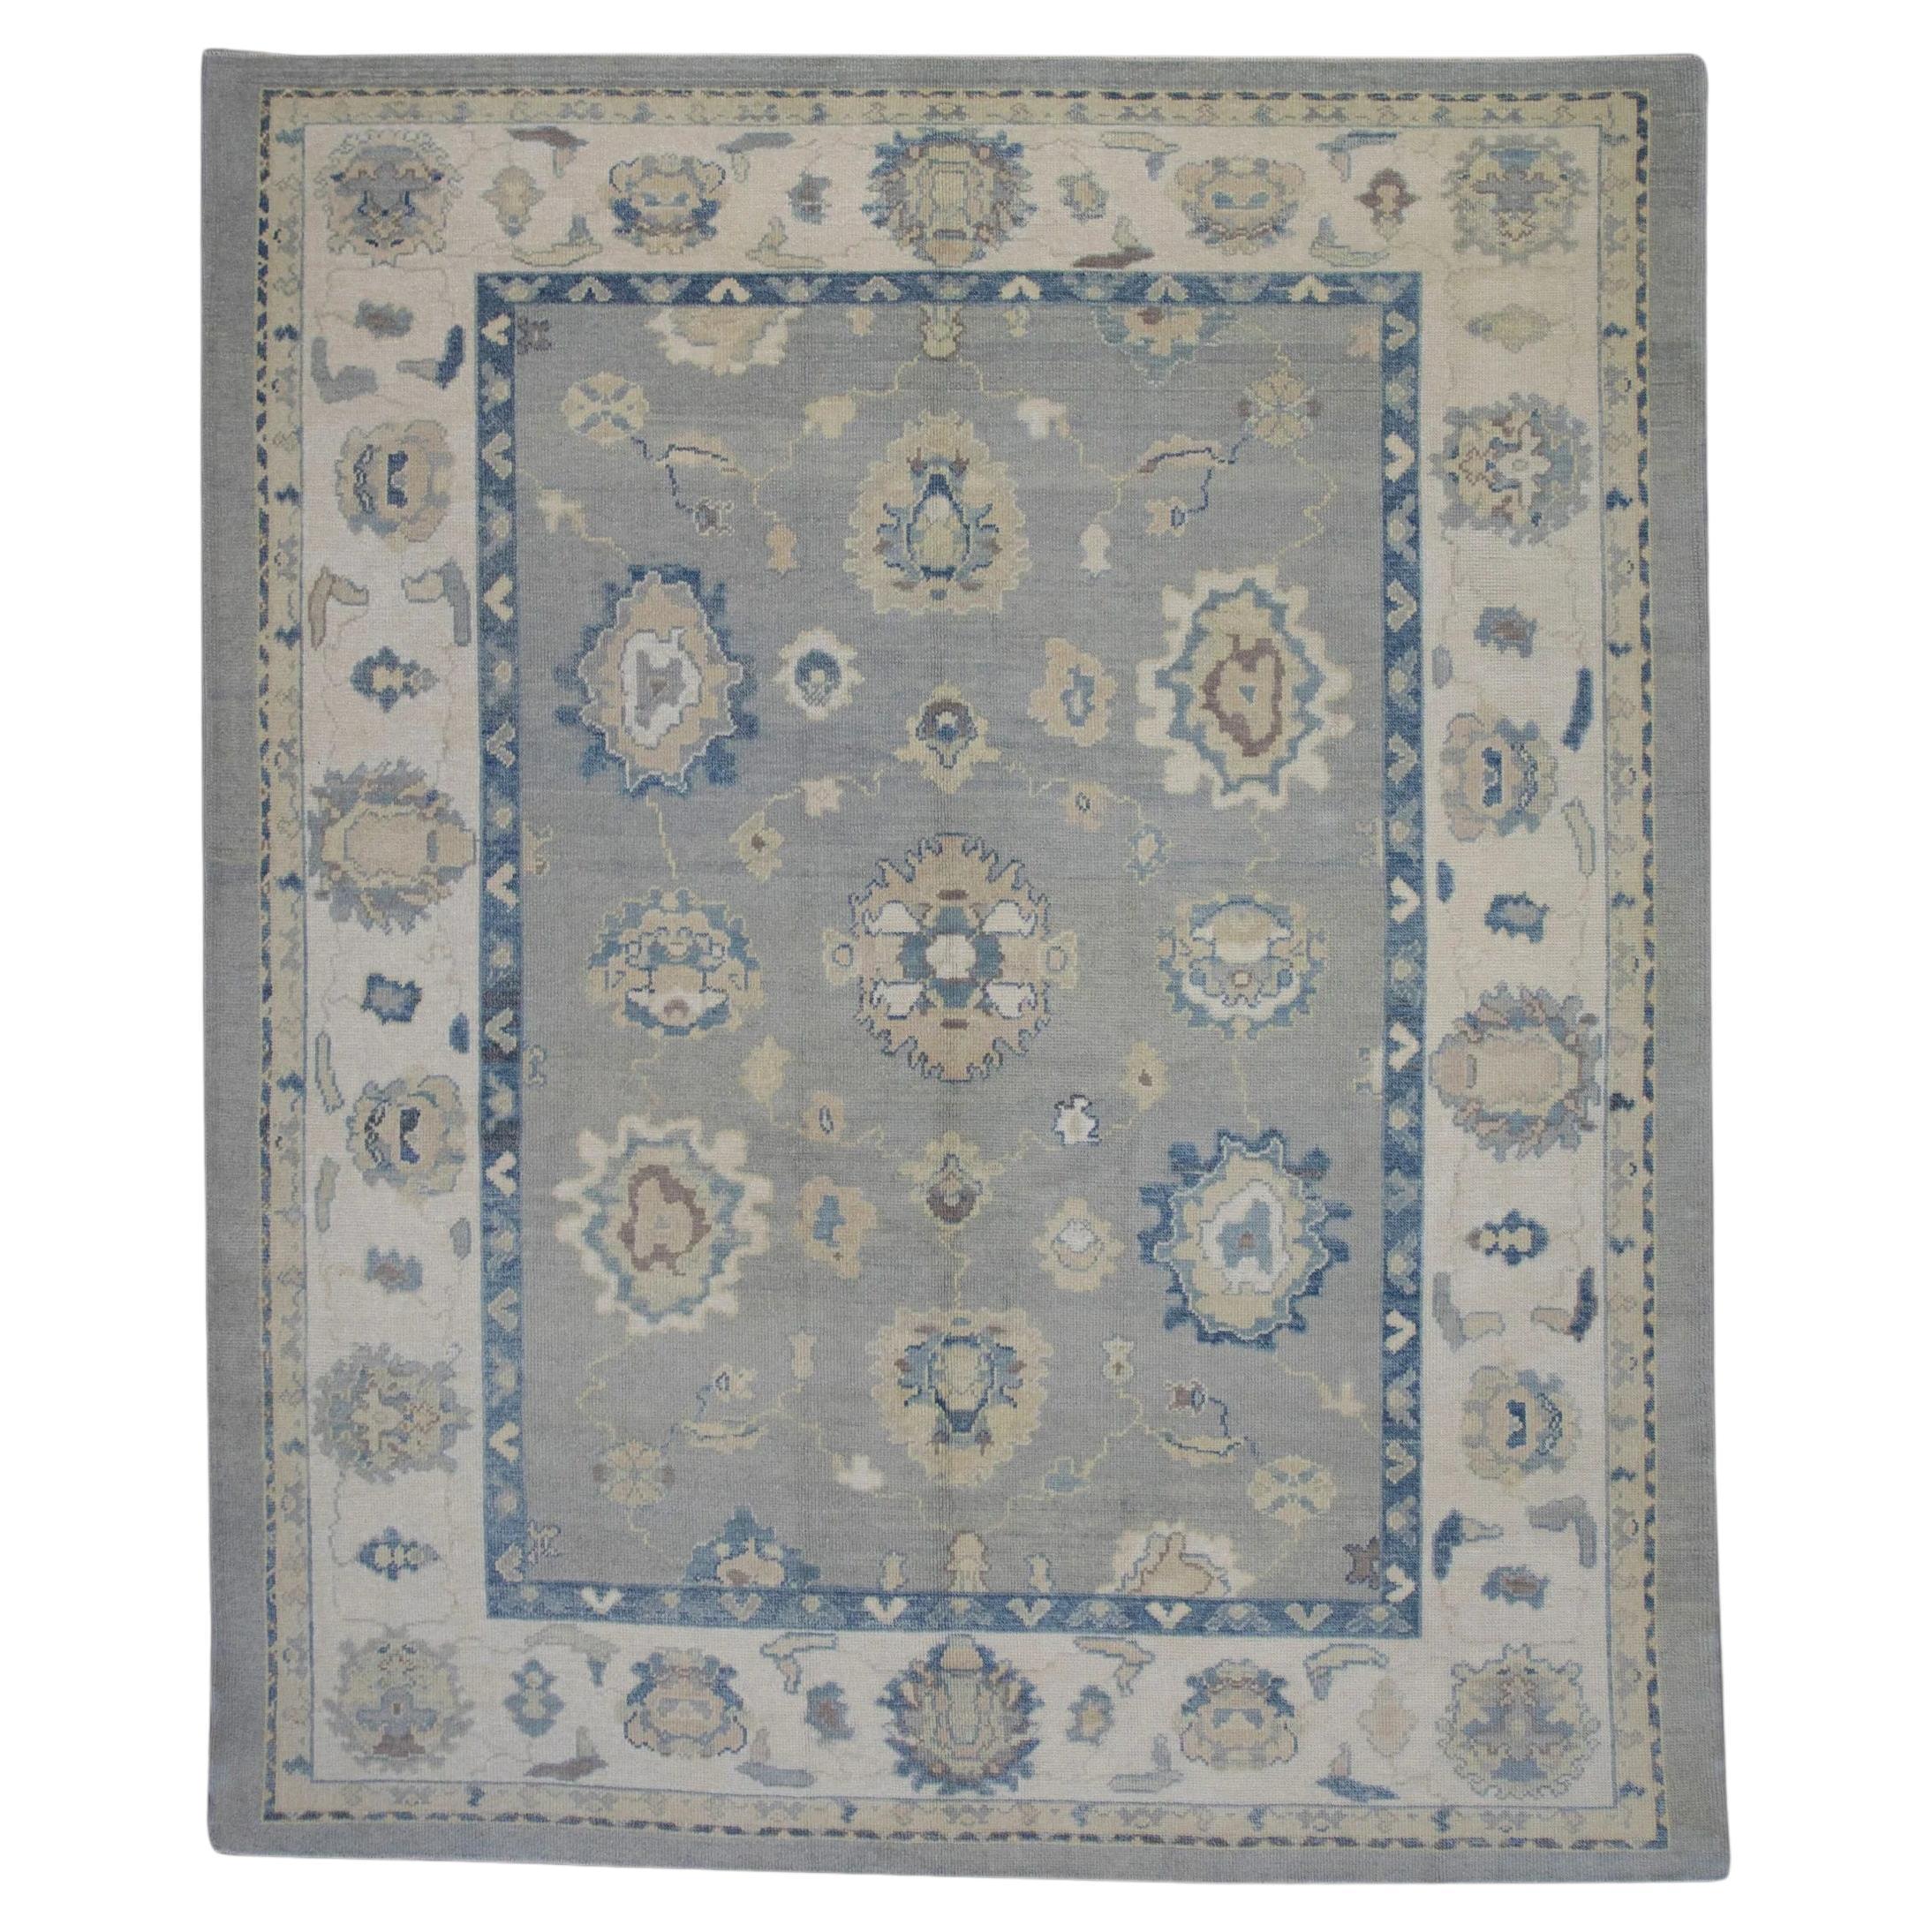 Handwoven Wool Floral Turkish Oushak Rug in Shades of Blue 9' x 10'6" For Sale